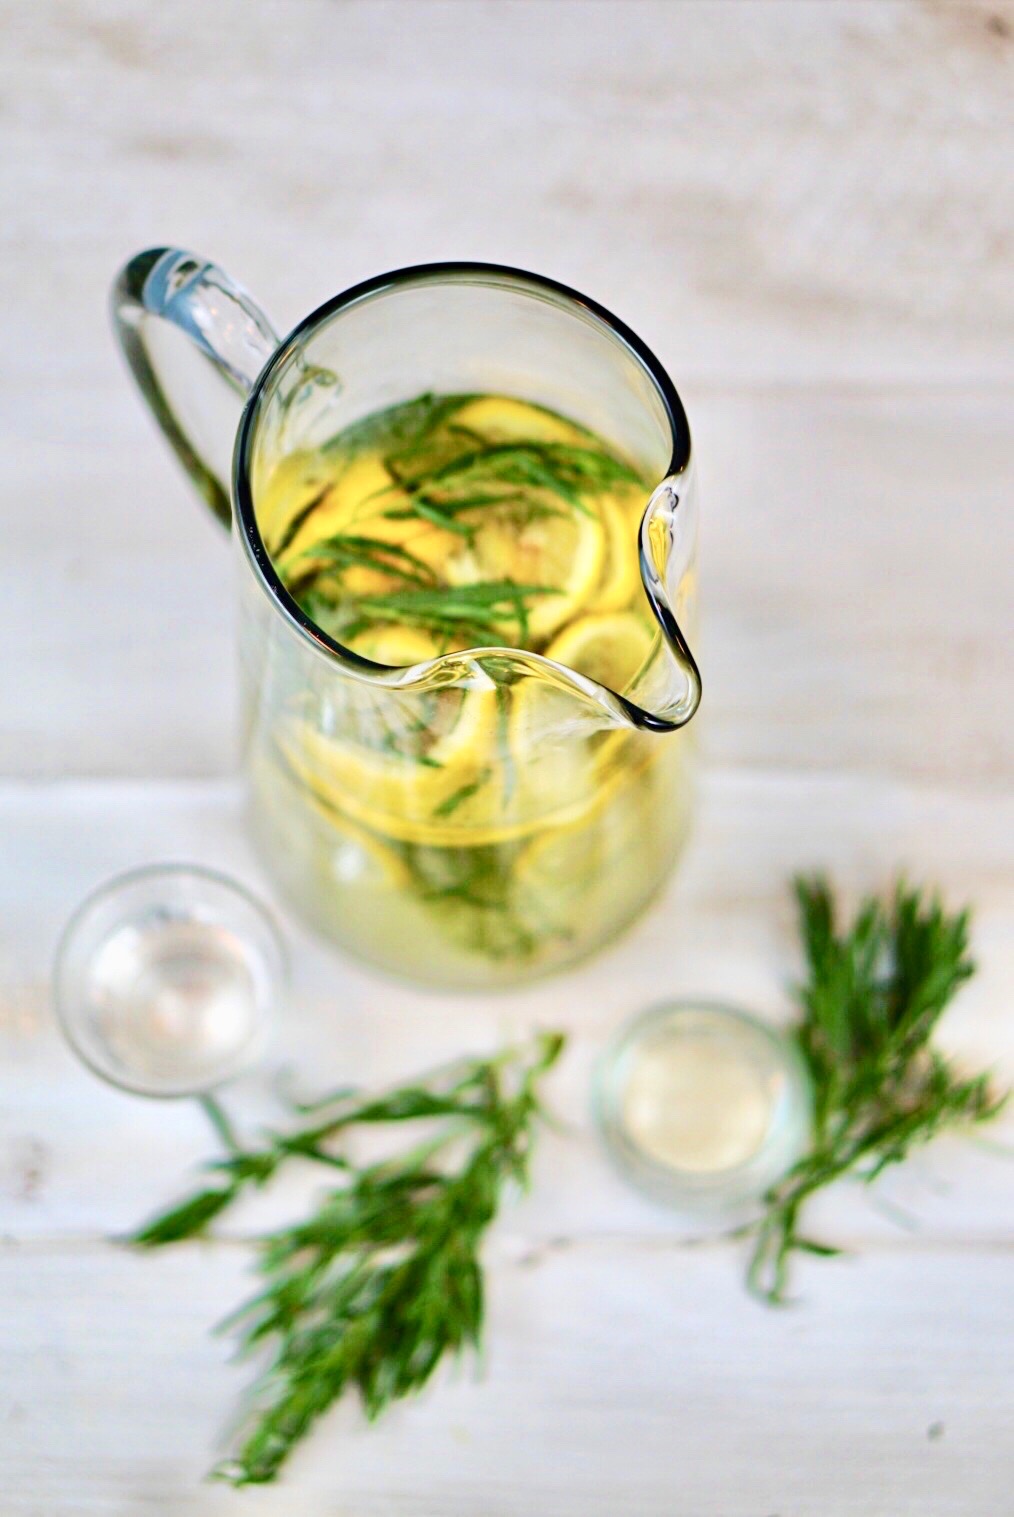 Tarragon Gin Lemonade exists on a higher plane than other gin and lemon cocktails. Its slight anise flavor enhances the lemon and highlights the herbaceous tones of the gin. Add in a bit of Elderflower and the result is a bright, crisp cocktail that is perfect for a hot summer’s evening!~By Wet Whistle Drinks by Darla Bentley